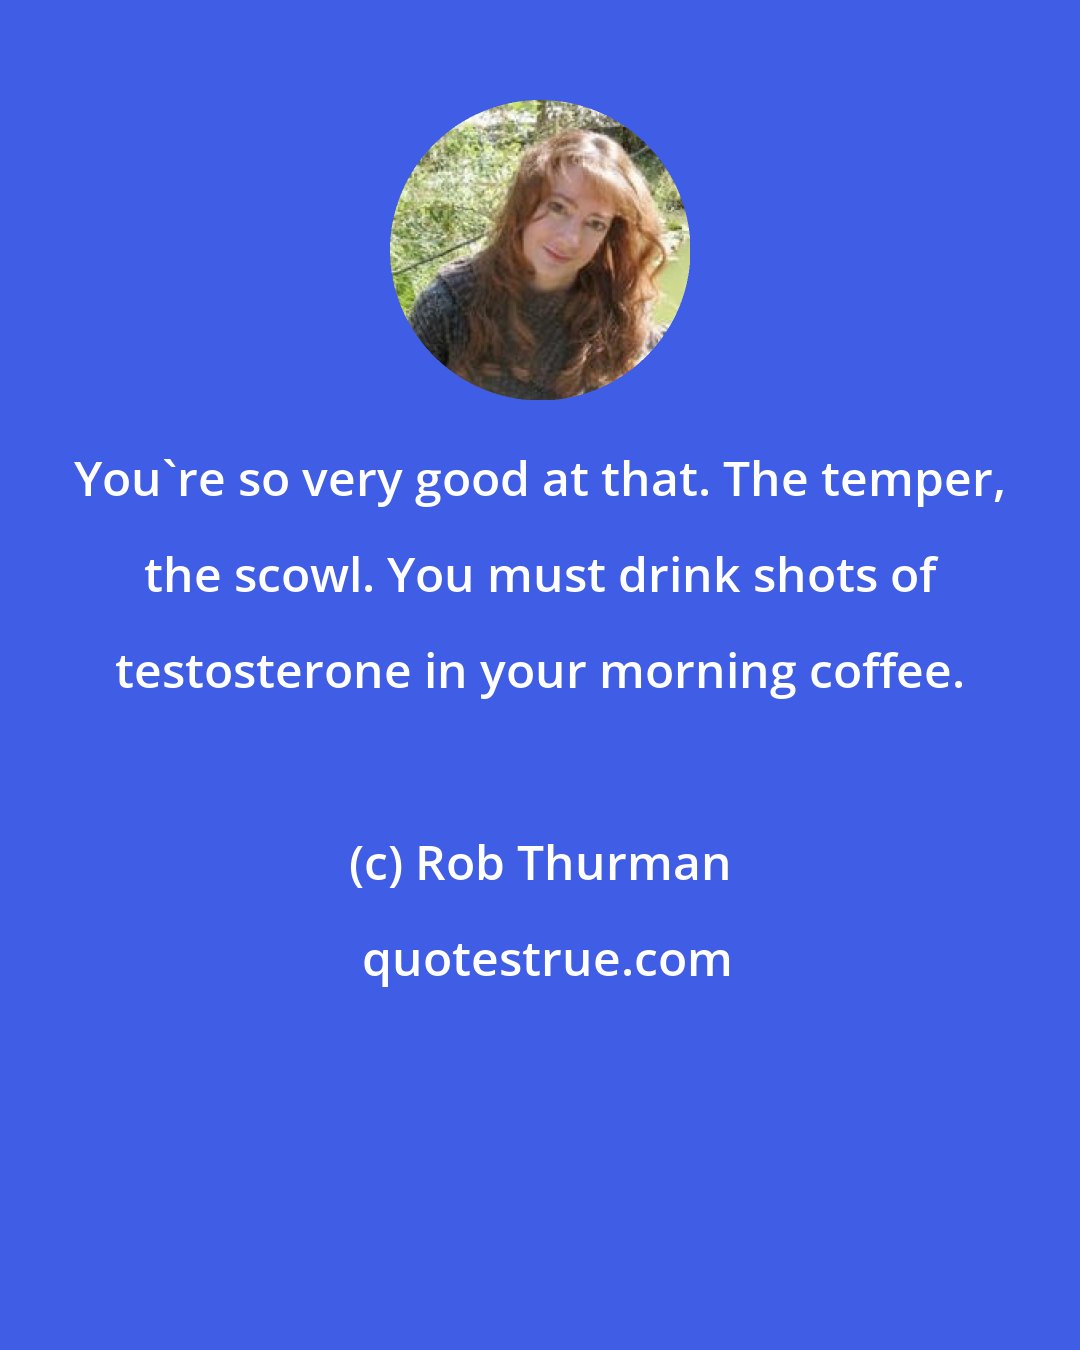 Rob Thurman: You're so very good at that. The temper, the scowl. You must drink shots of testosterone in your morning coffee.